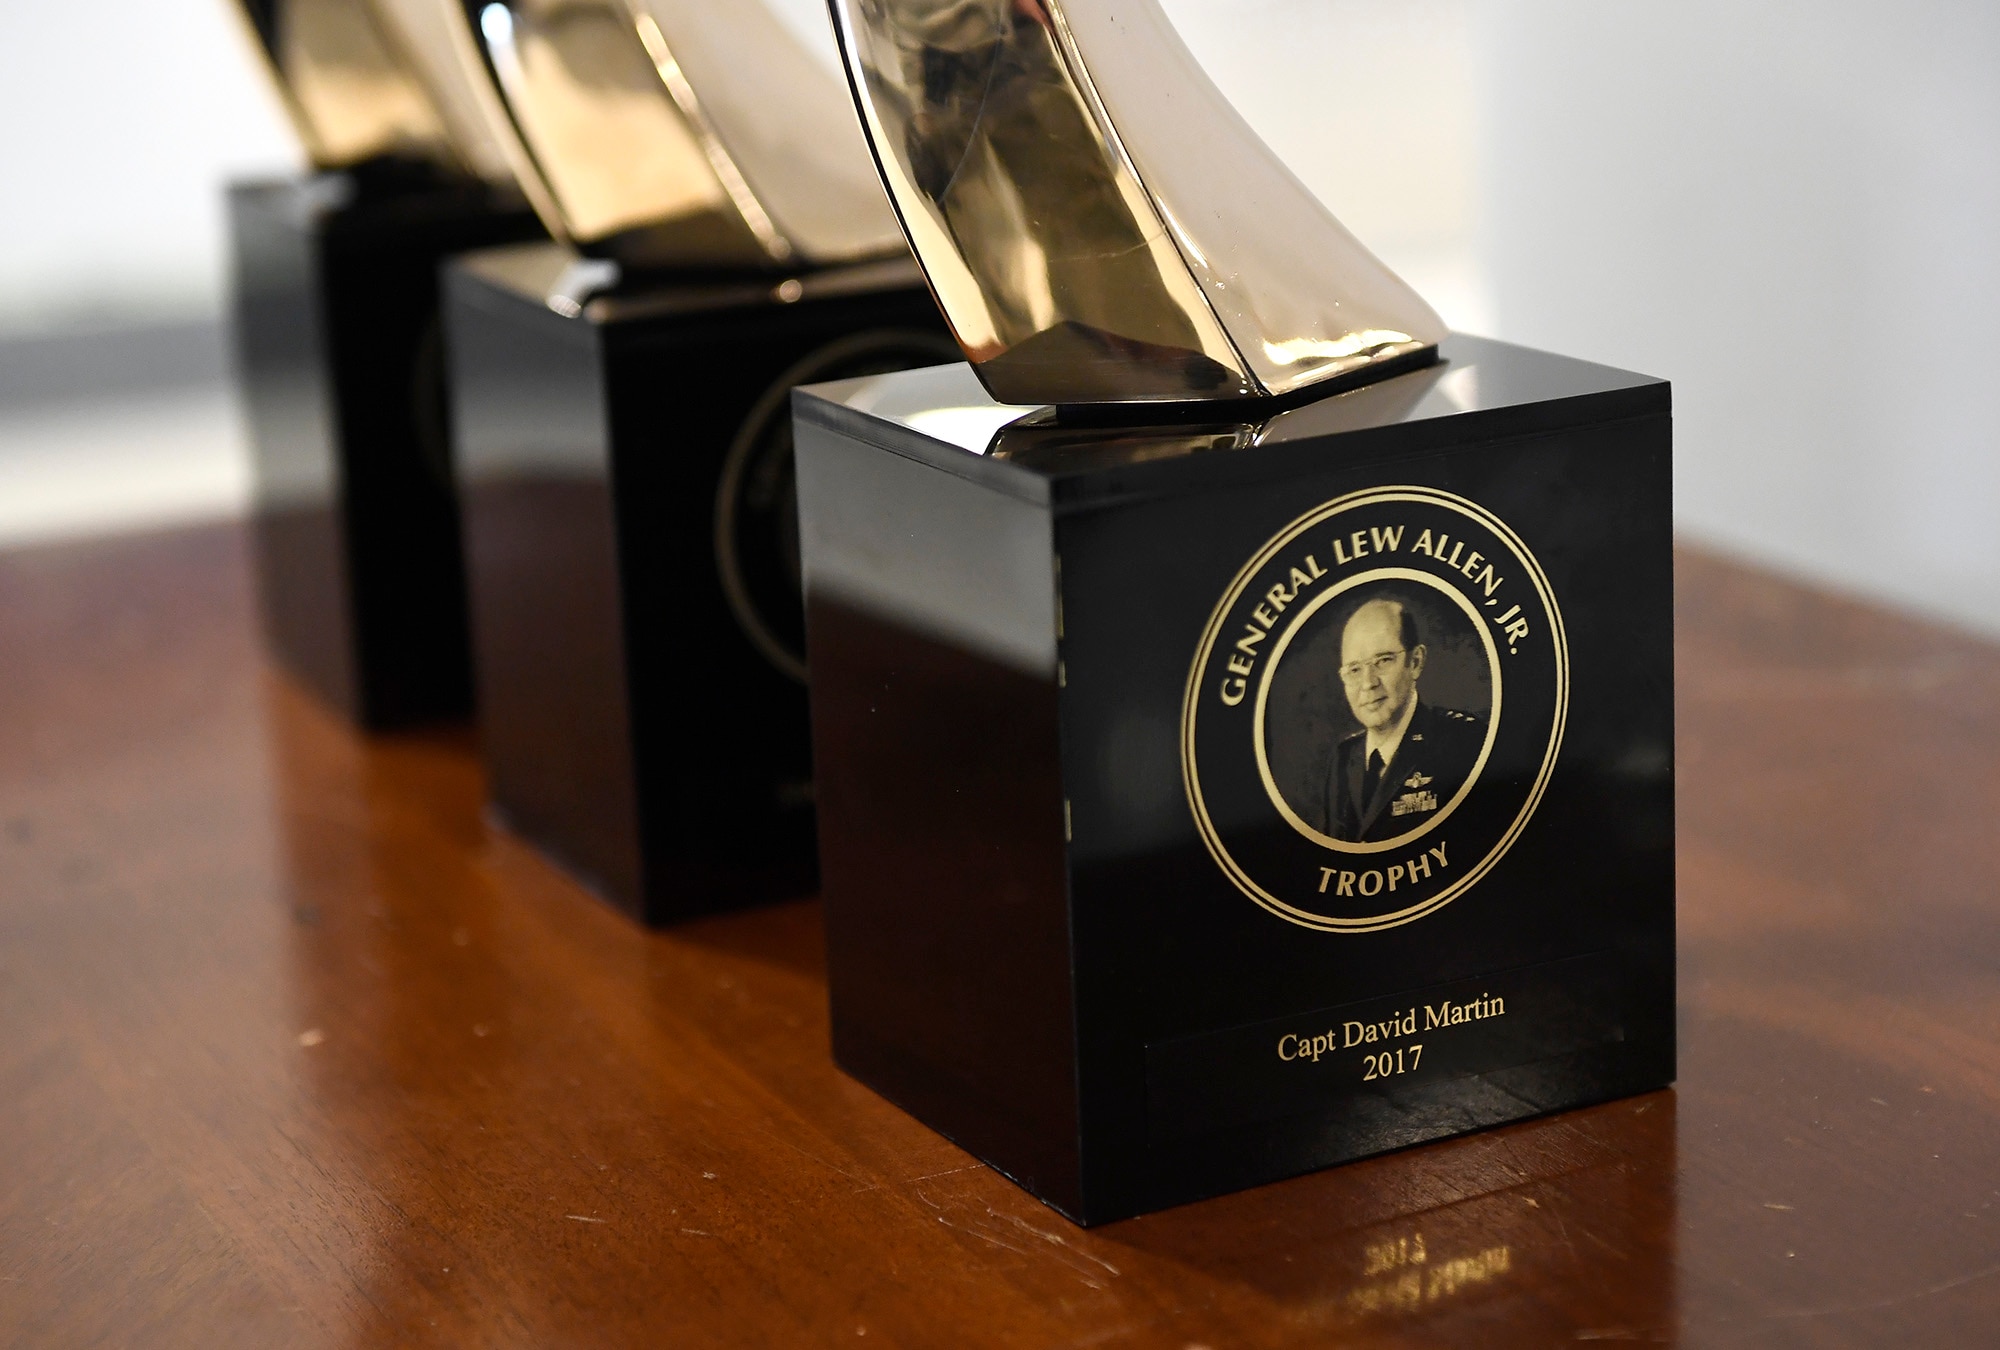 Gen. Lew Allen Jr. trophies are on display prior to the Gen. Lew Allen Jr., award ceremony at the Pentagon, Arlington, Va., April 27, 2018. The annual award, named after the 10th Air Force chief of staff, recognizes the accomplishments of base-level officers and senior NCOs in their performance of aircraft, munitions or missile maintenance. (U.S. Air Force photo by Staff Sgt. Rusty Frank)